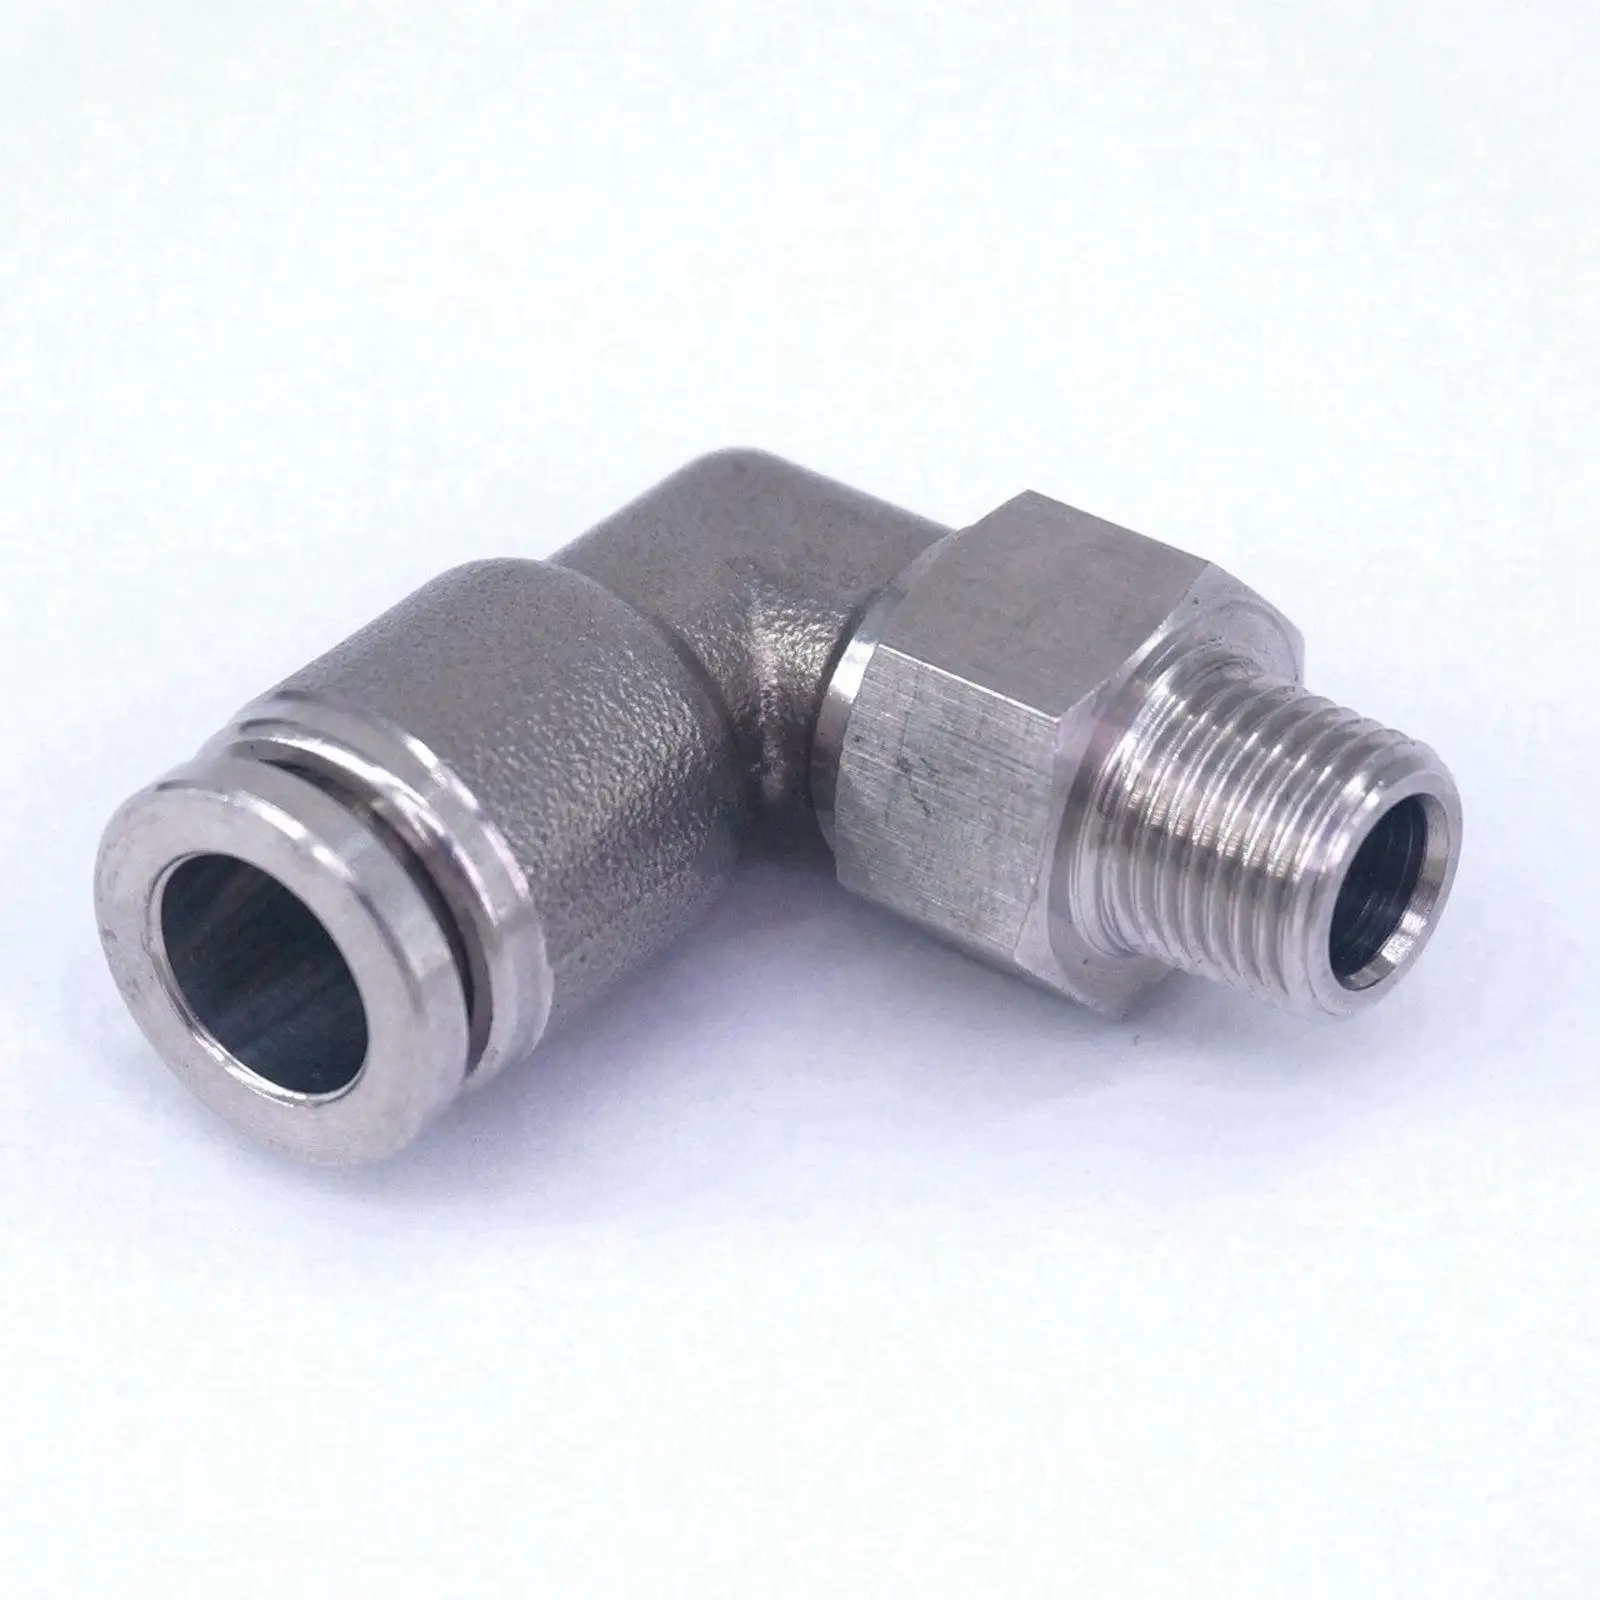 

Fit Tube OD 8mm-1/8" BSP Male Elbow 304 Stainless Steel Pneumatic Connector Quick Connector Fittings